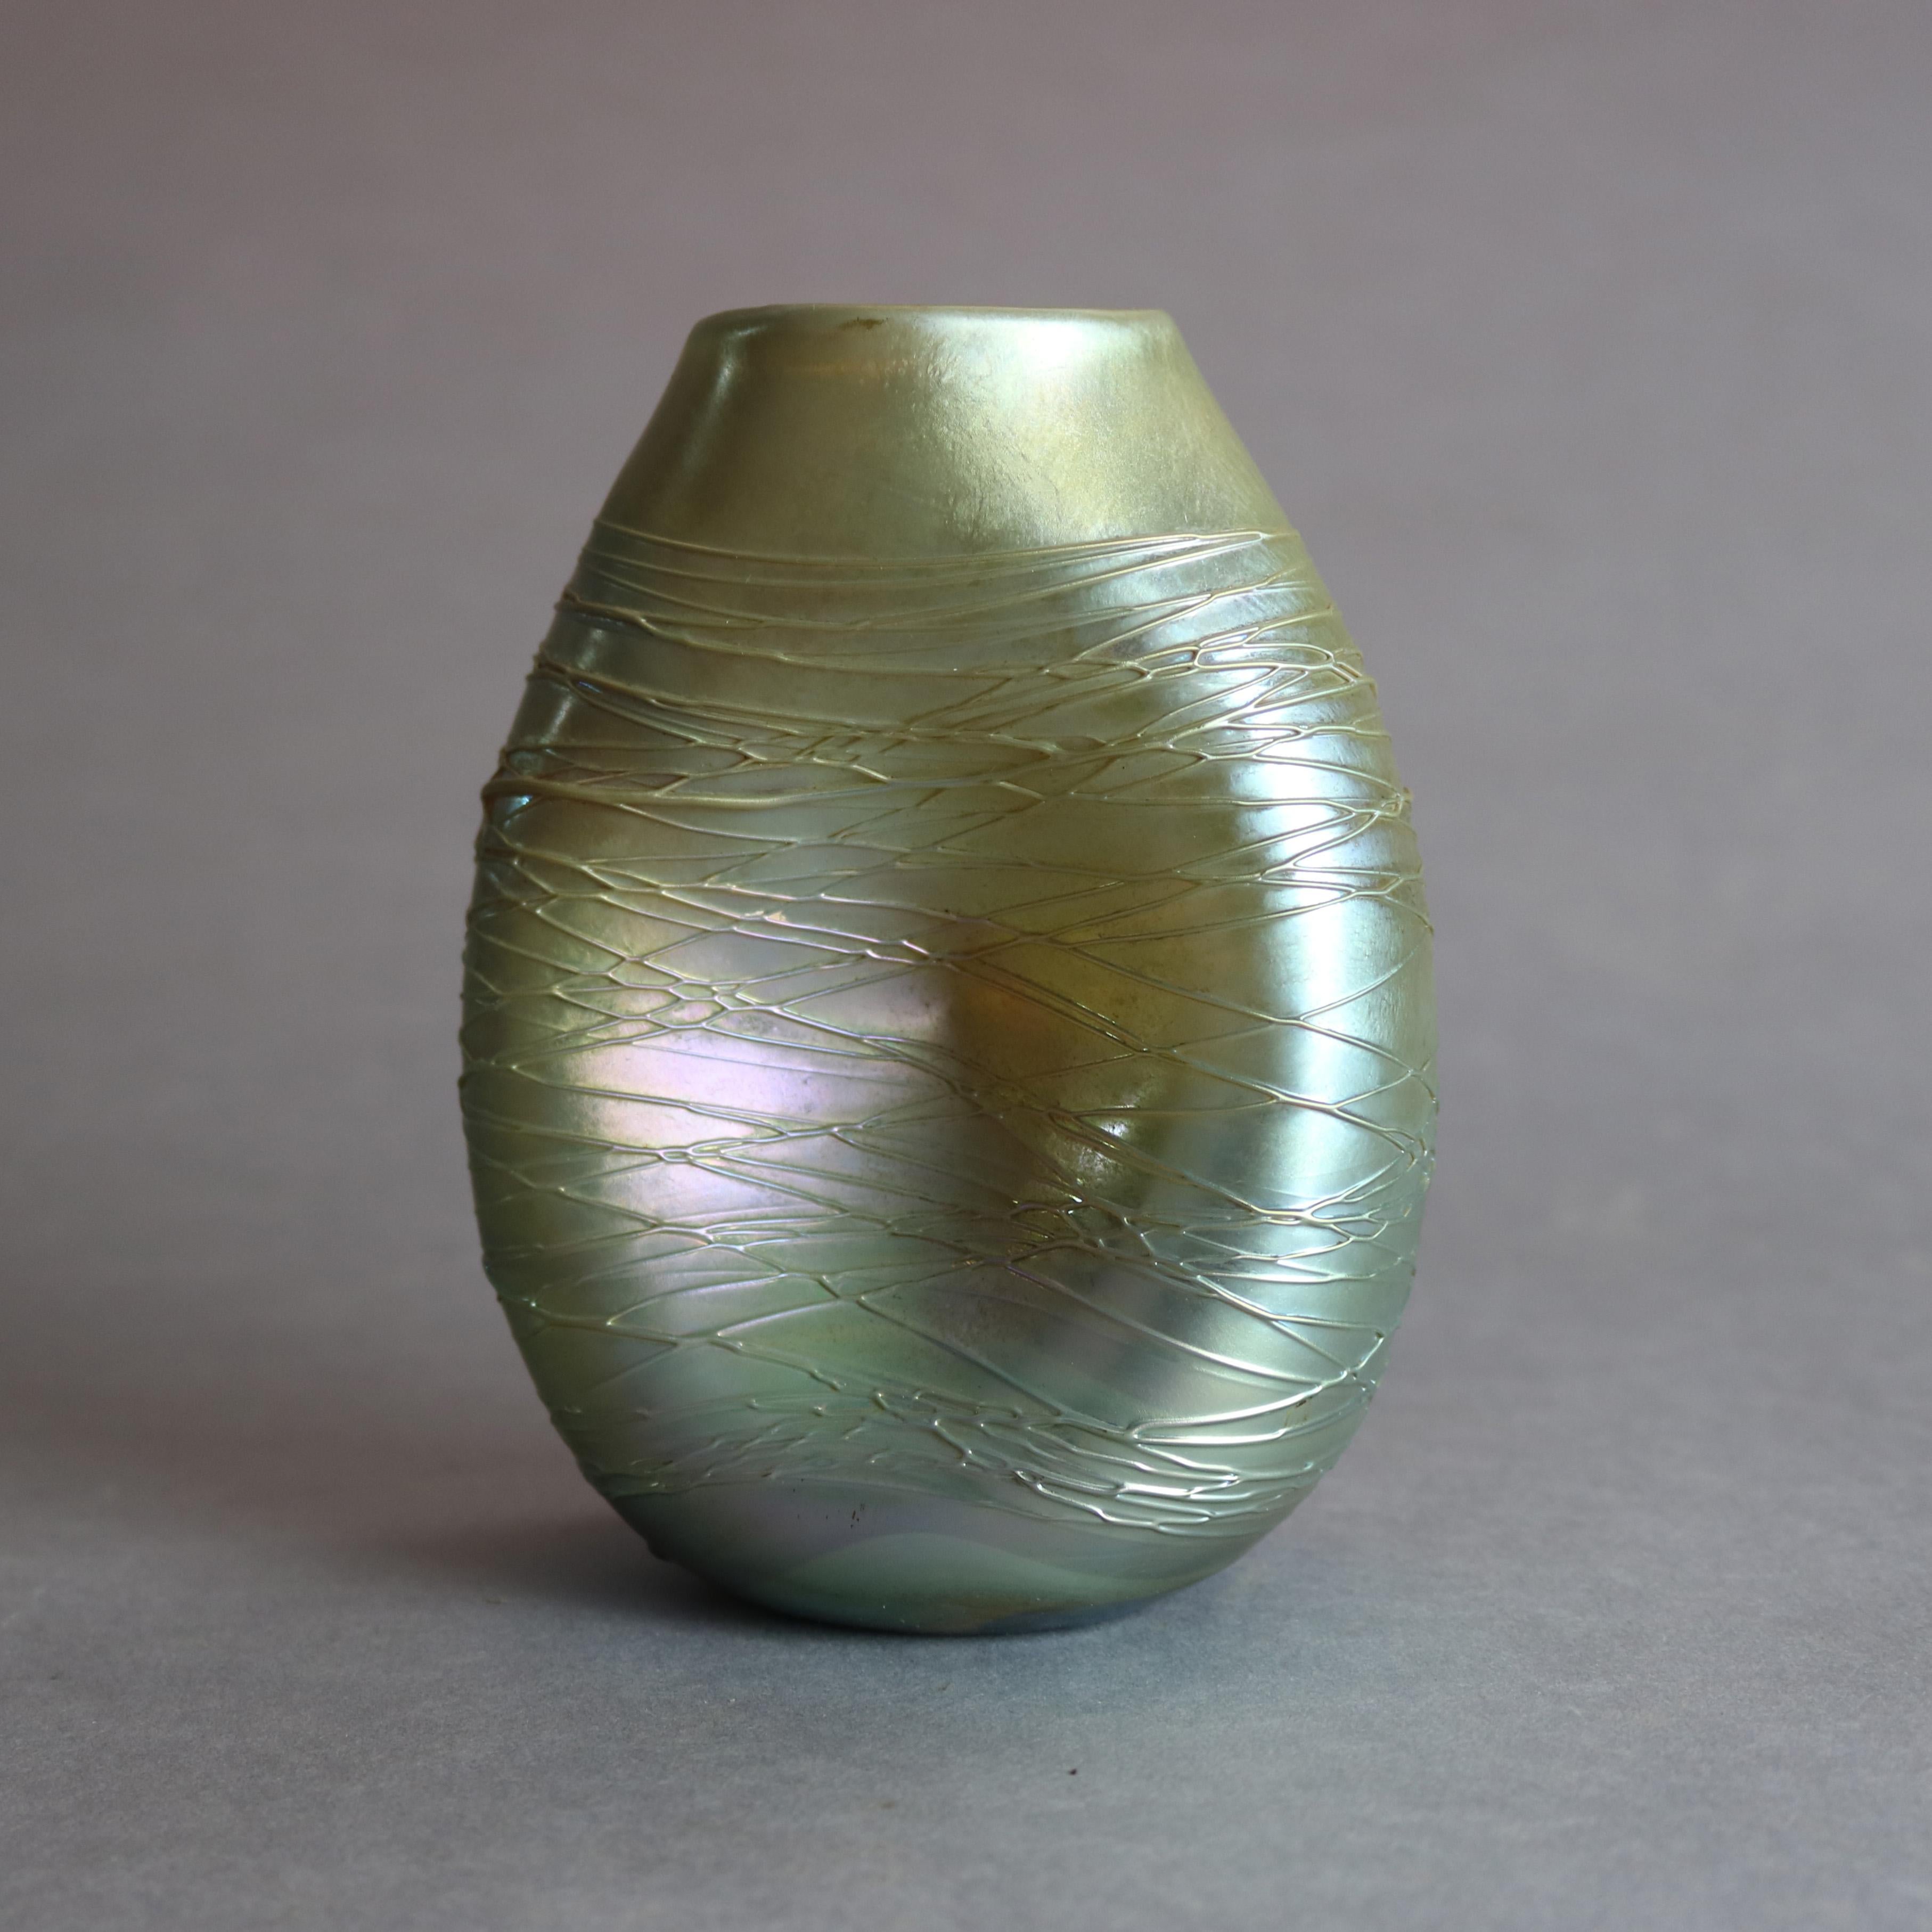 An antique art glass vase by Durand features threaded glass in pinched form, signed on base 